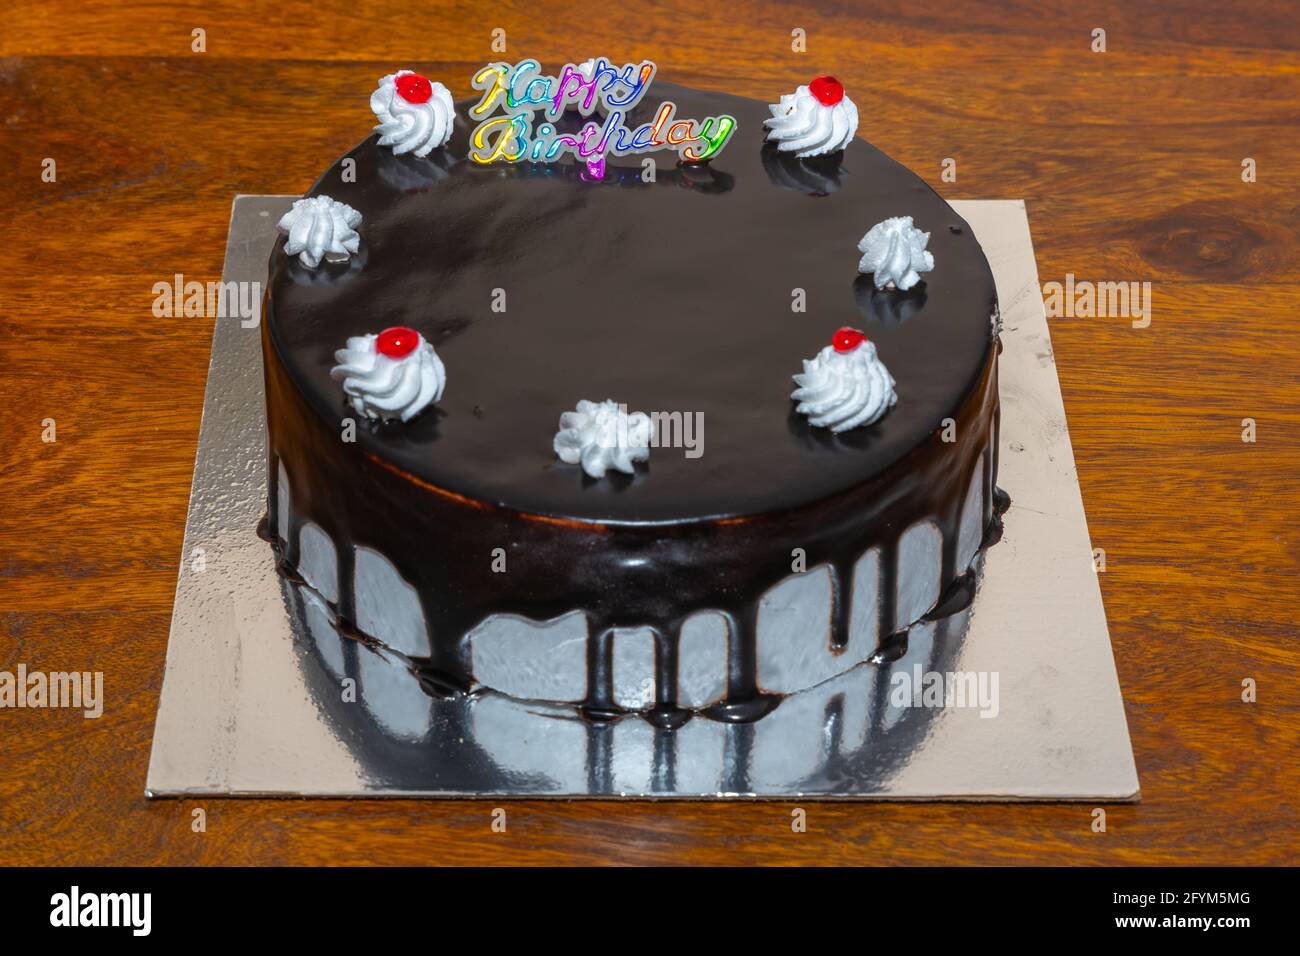 A dark chocolate cake with cherry topping and Happy birthday ...